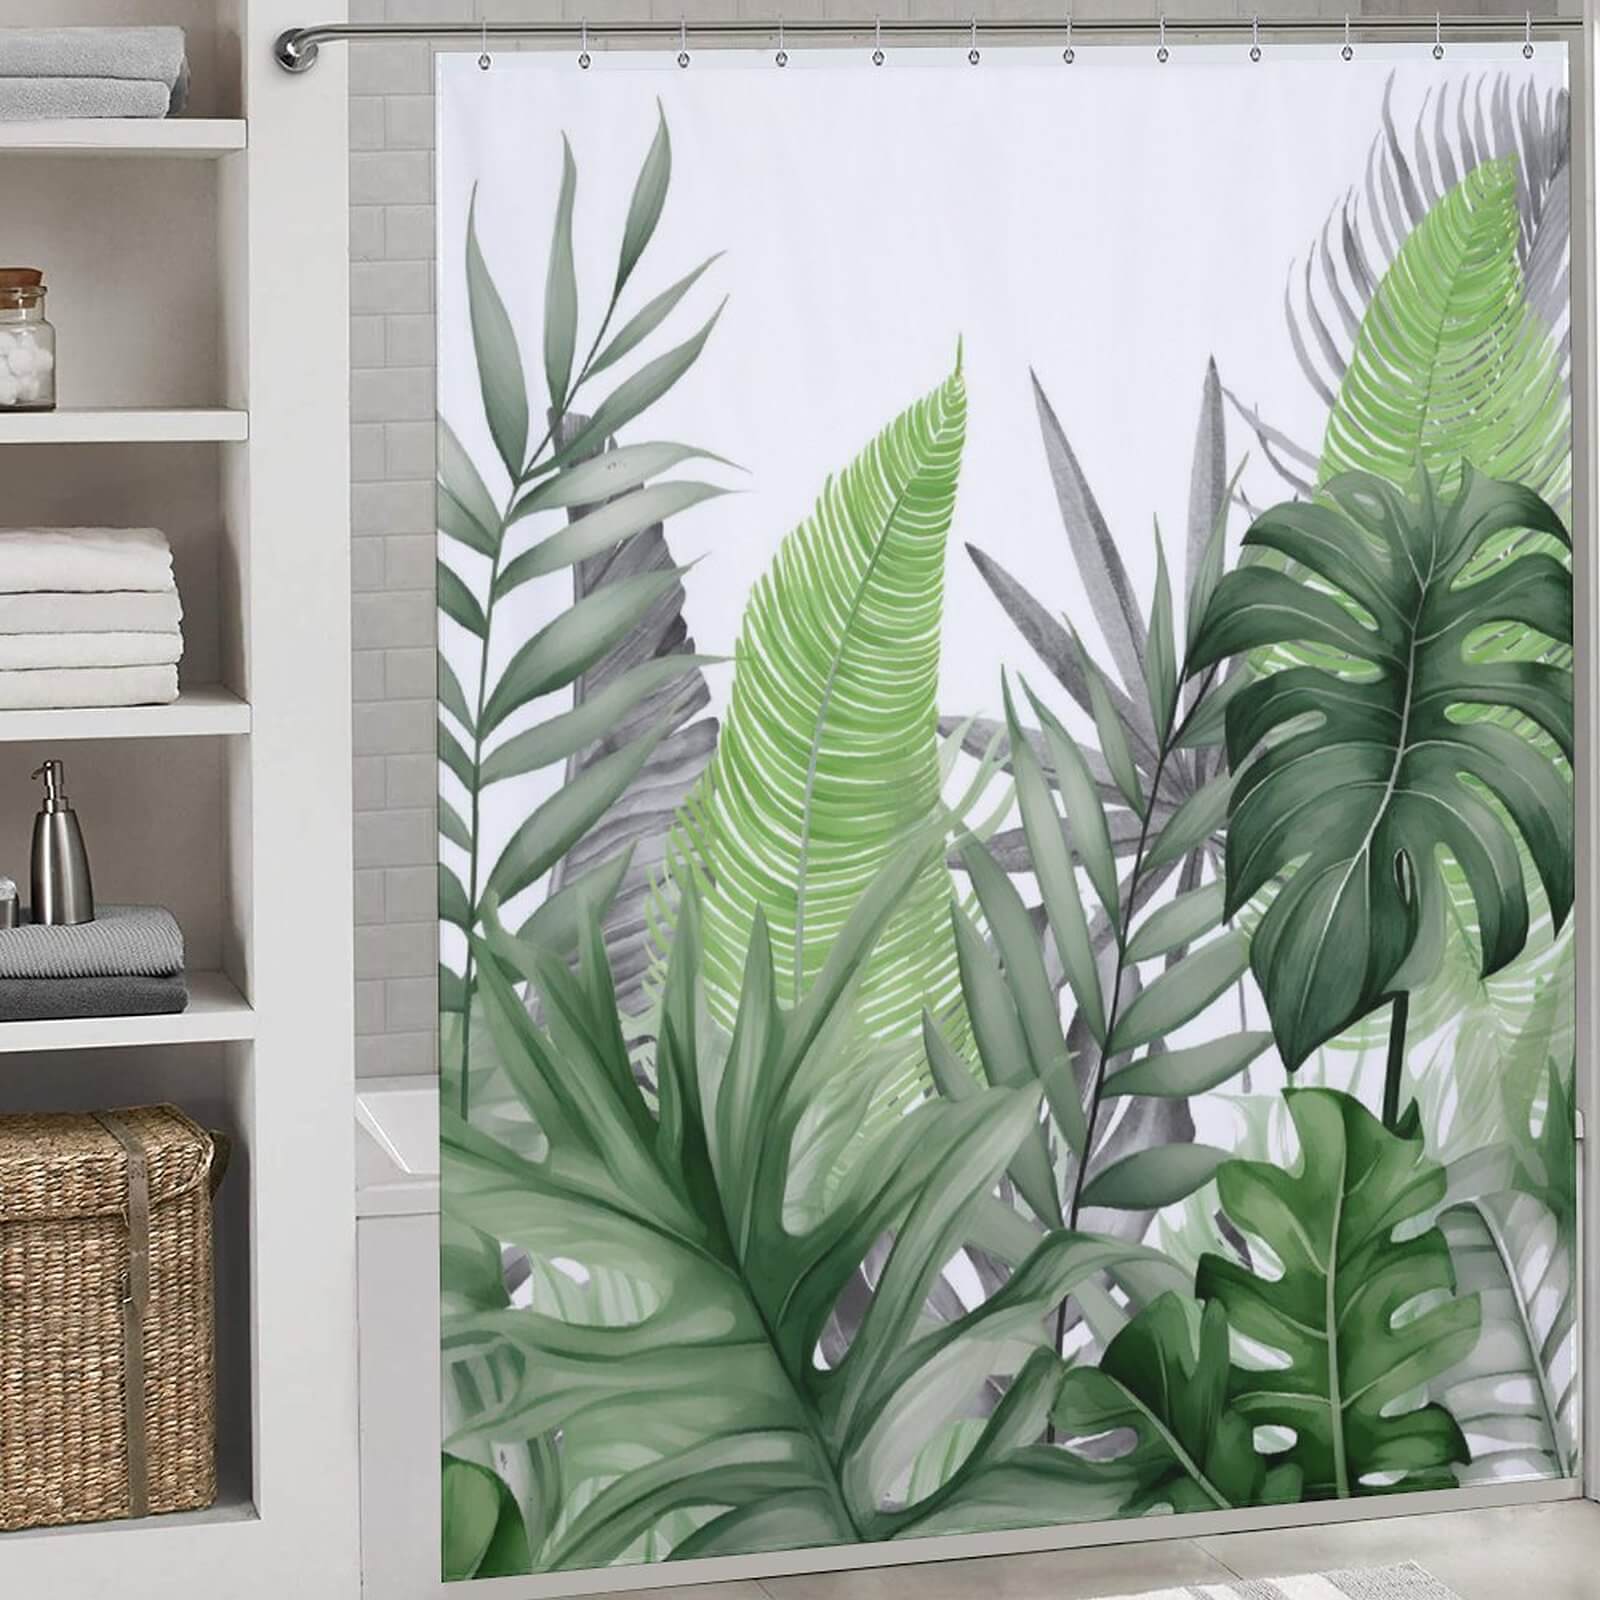 A waterproof Monstera Leaf Jungle Shower Curtain-Cottoncat adorned with monstera leaves.